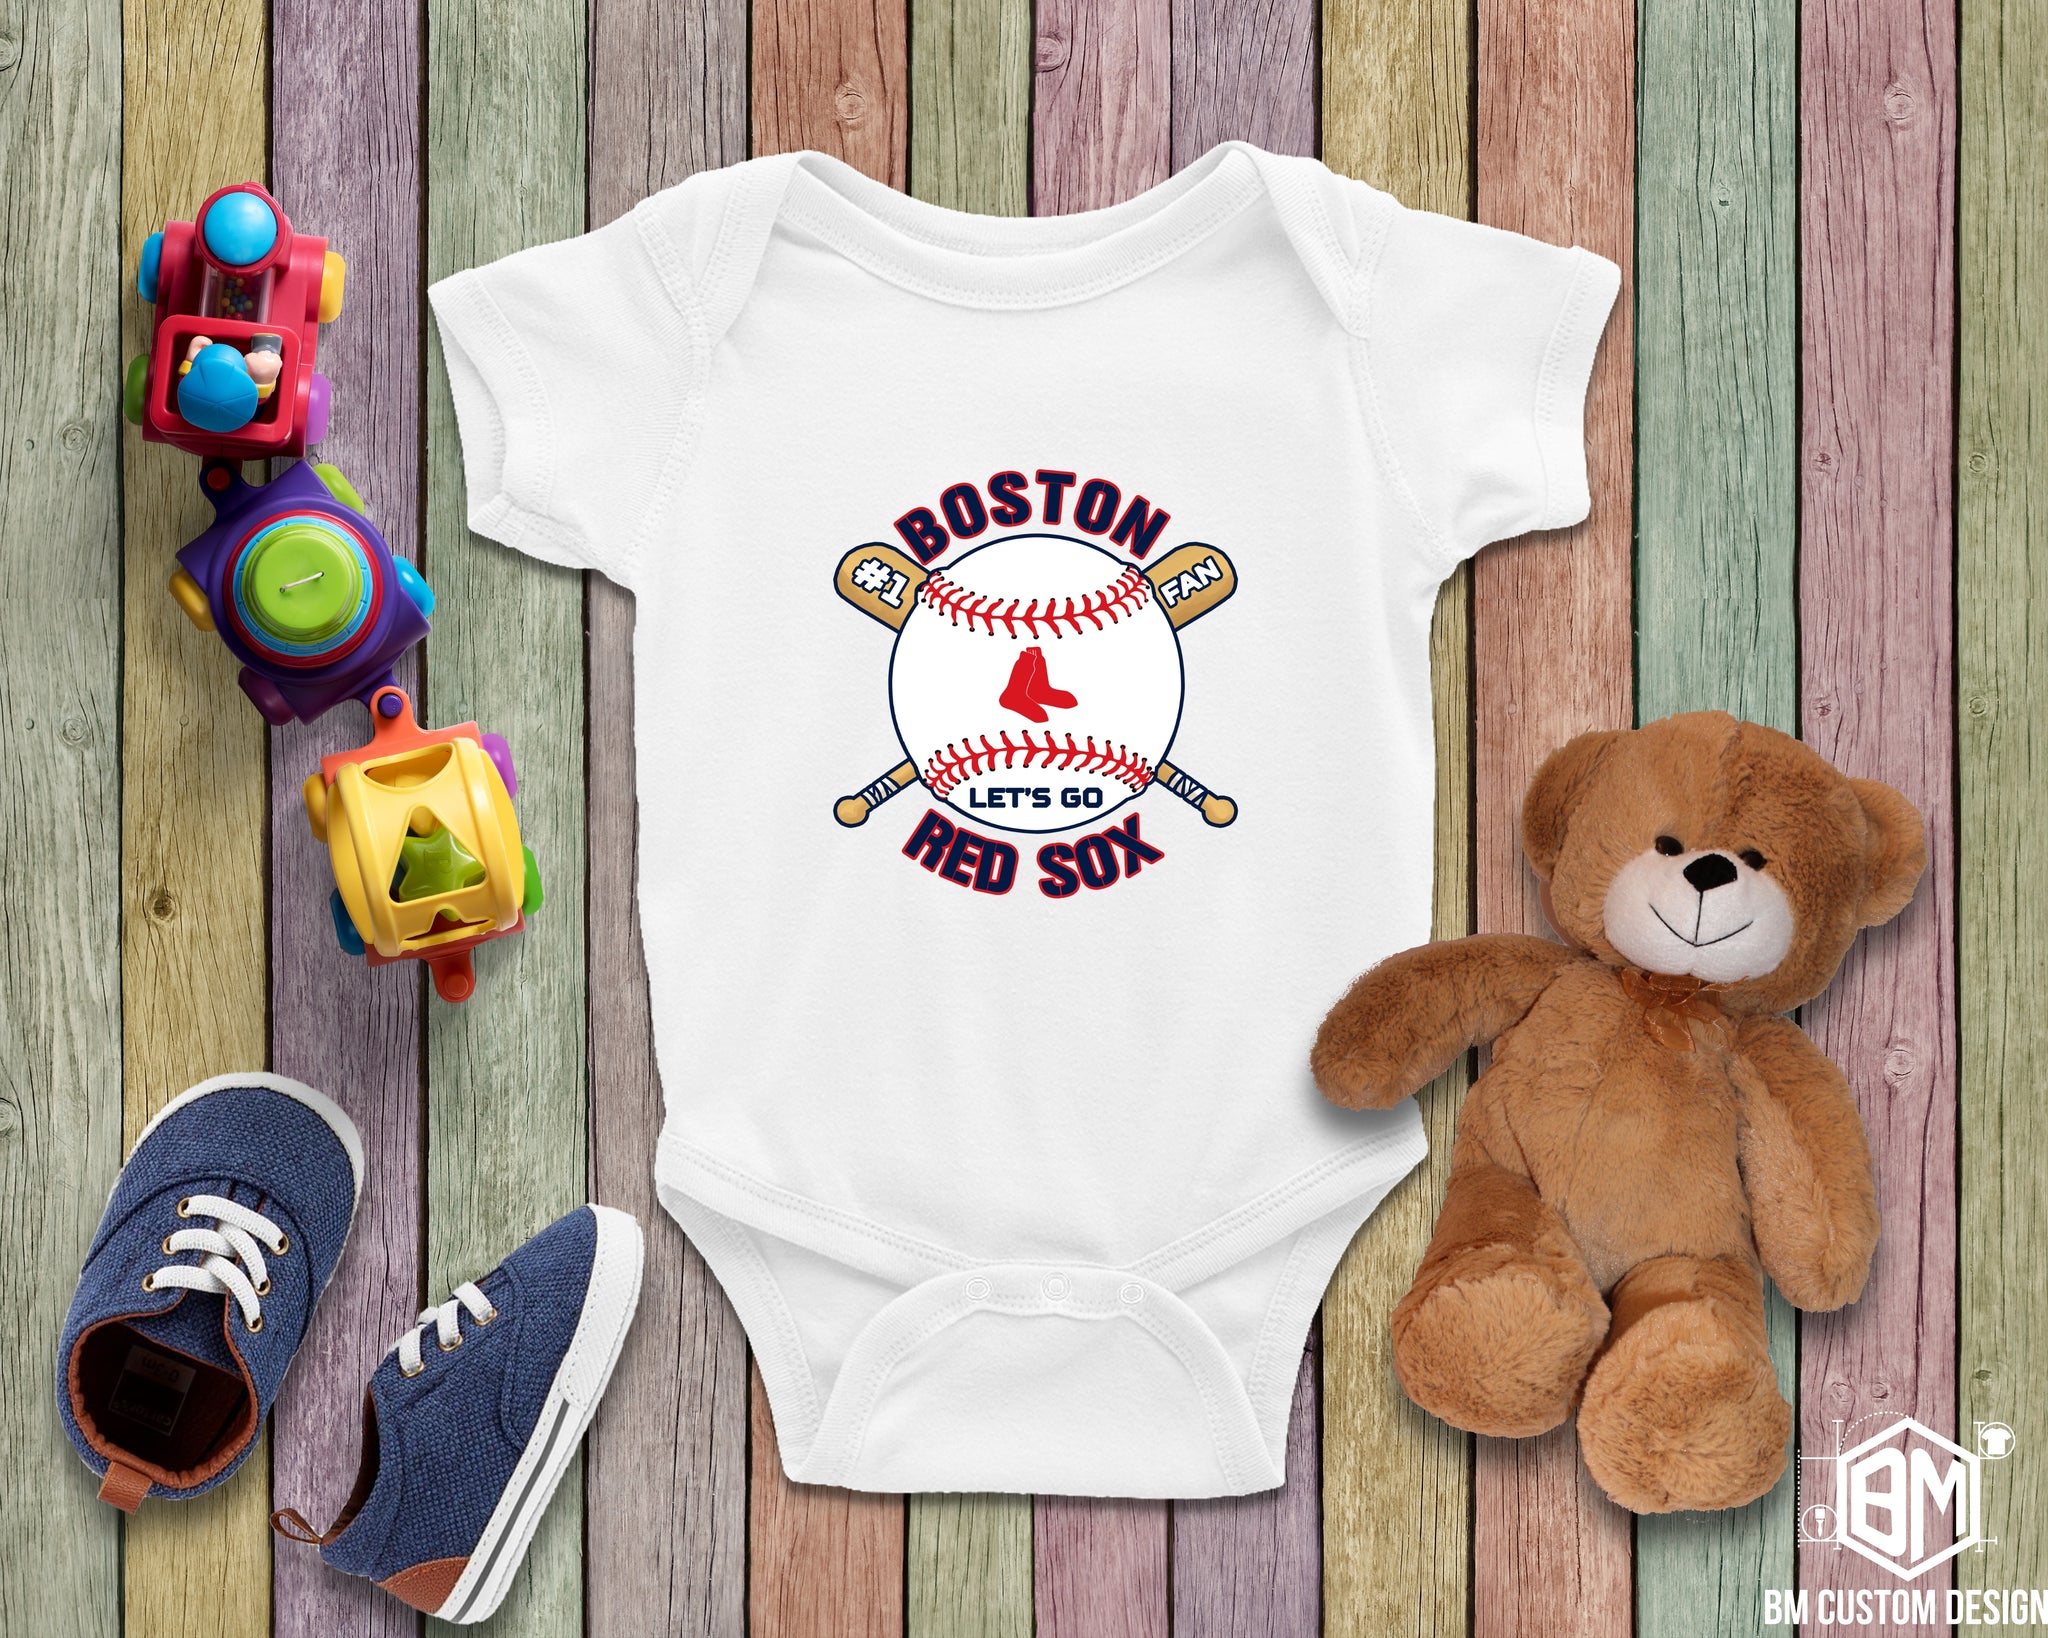 personalized red sox jersey baby